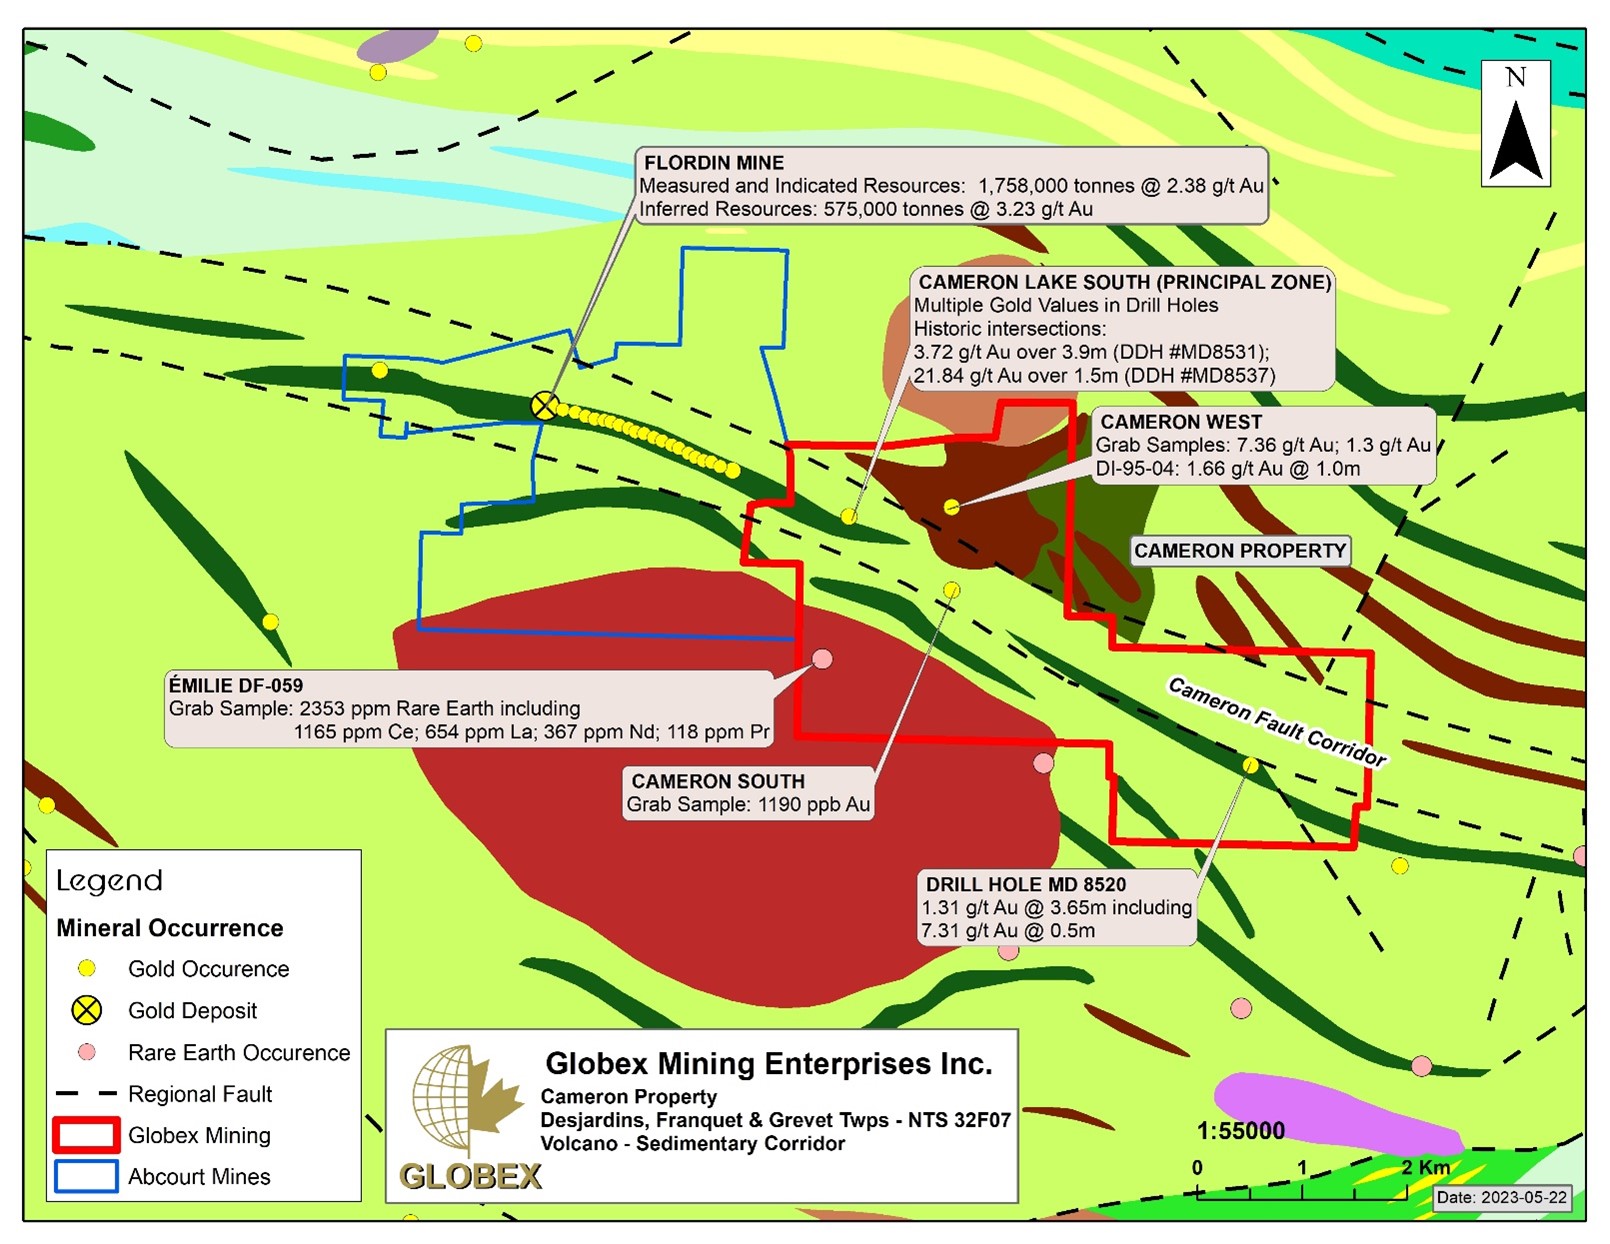 Cameron Property – Mineral Occurrences